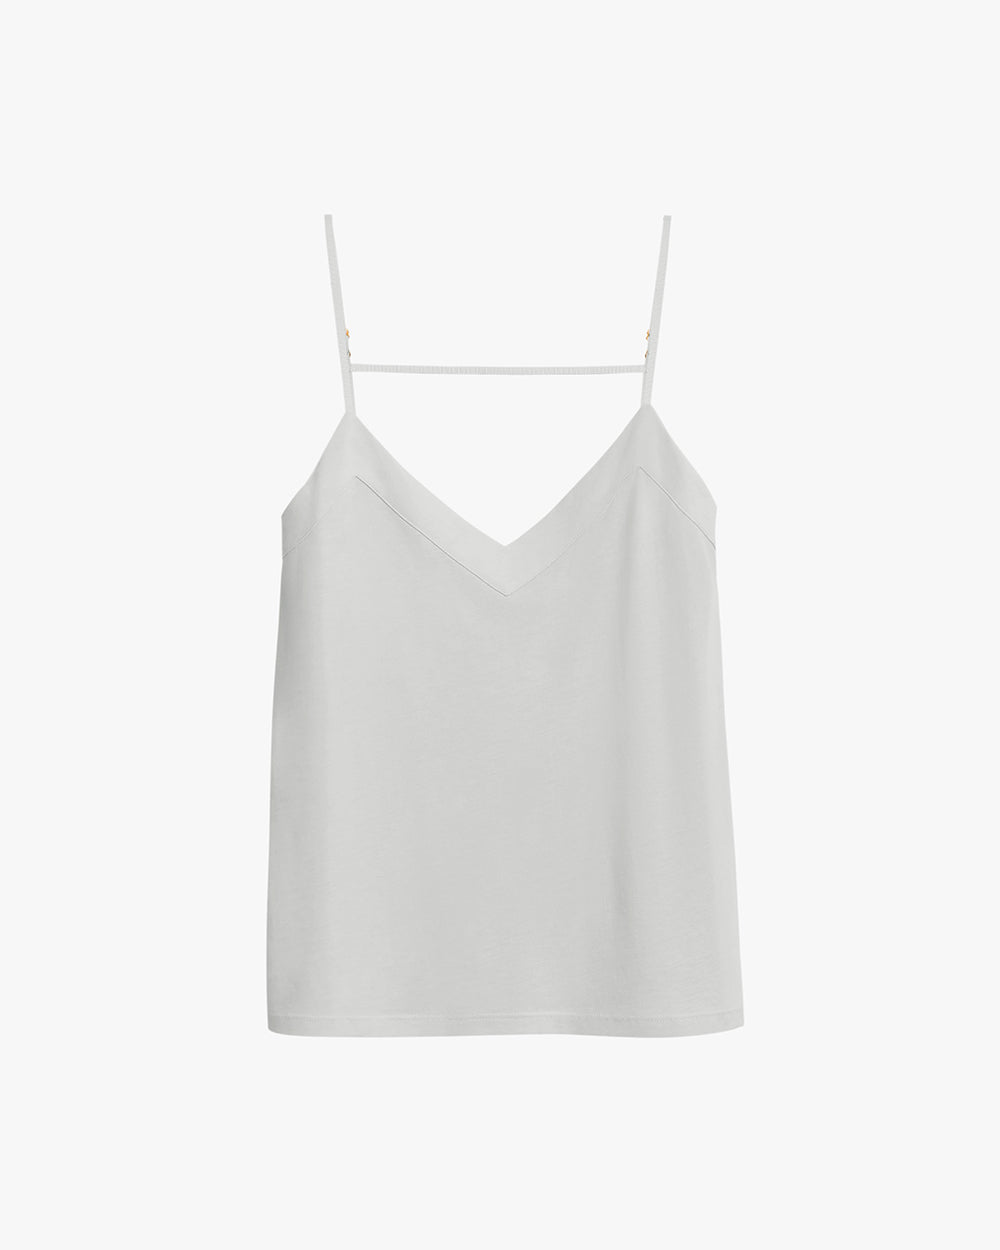 Women's tank top with thin straps and V-neckline, hanging on a hanger.